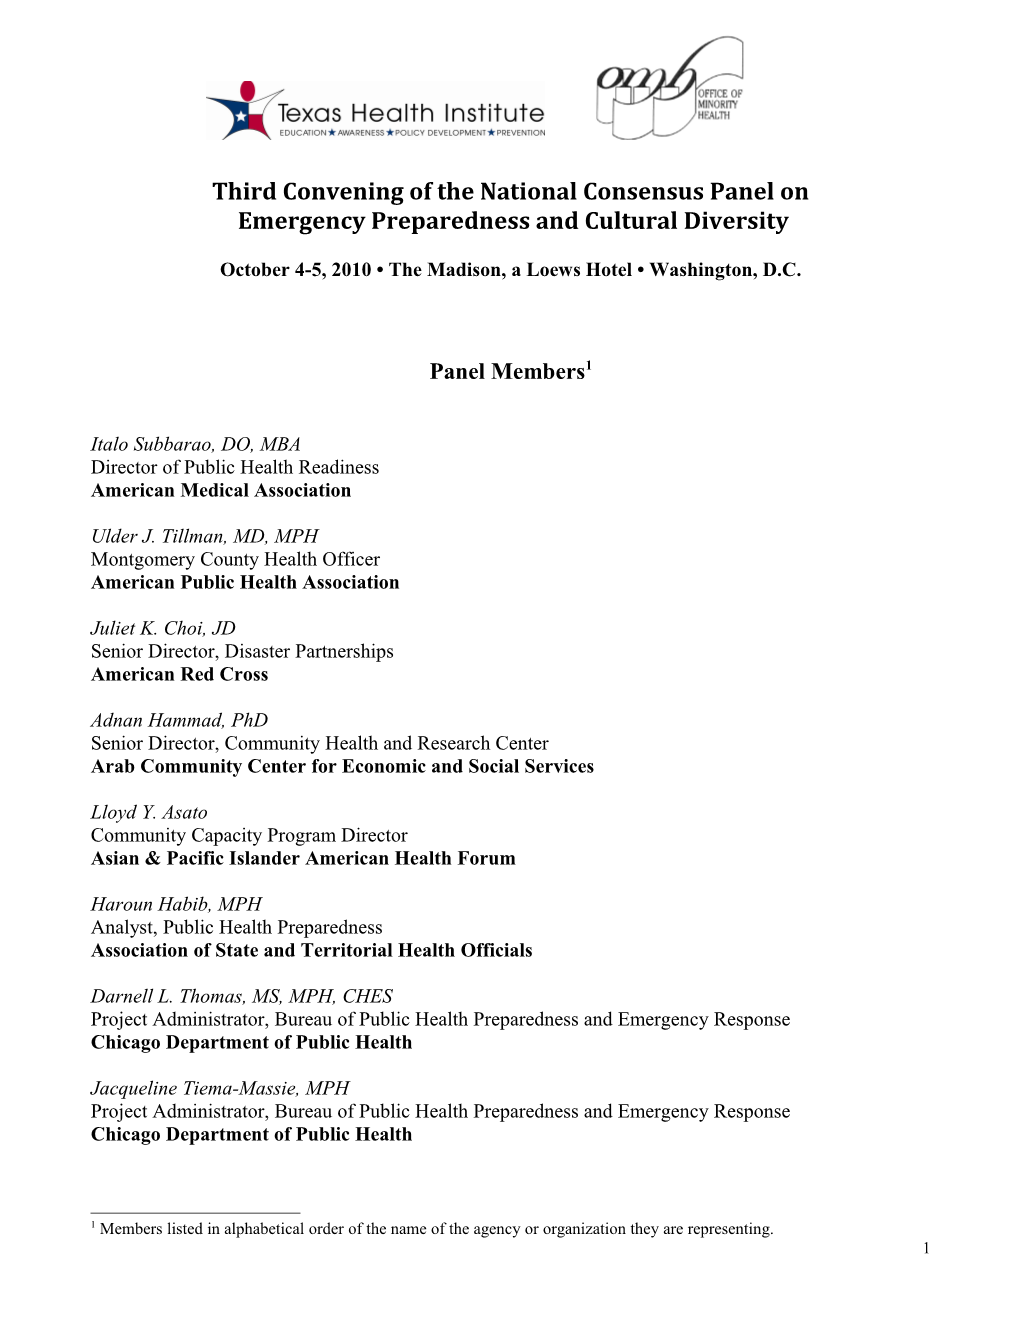 The First National Consensus Panel Meeting on Emergency Preparedness And